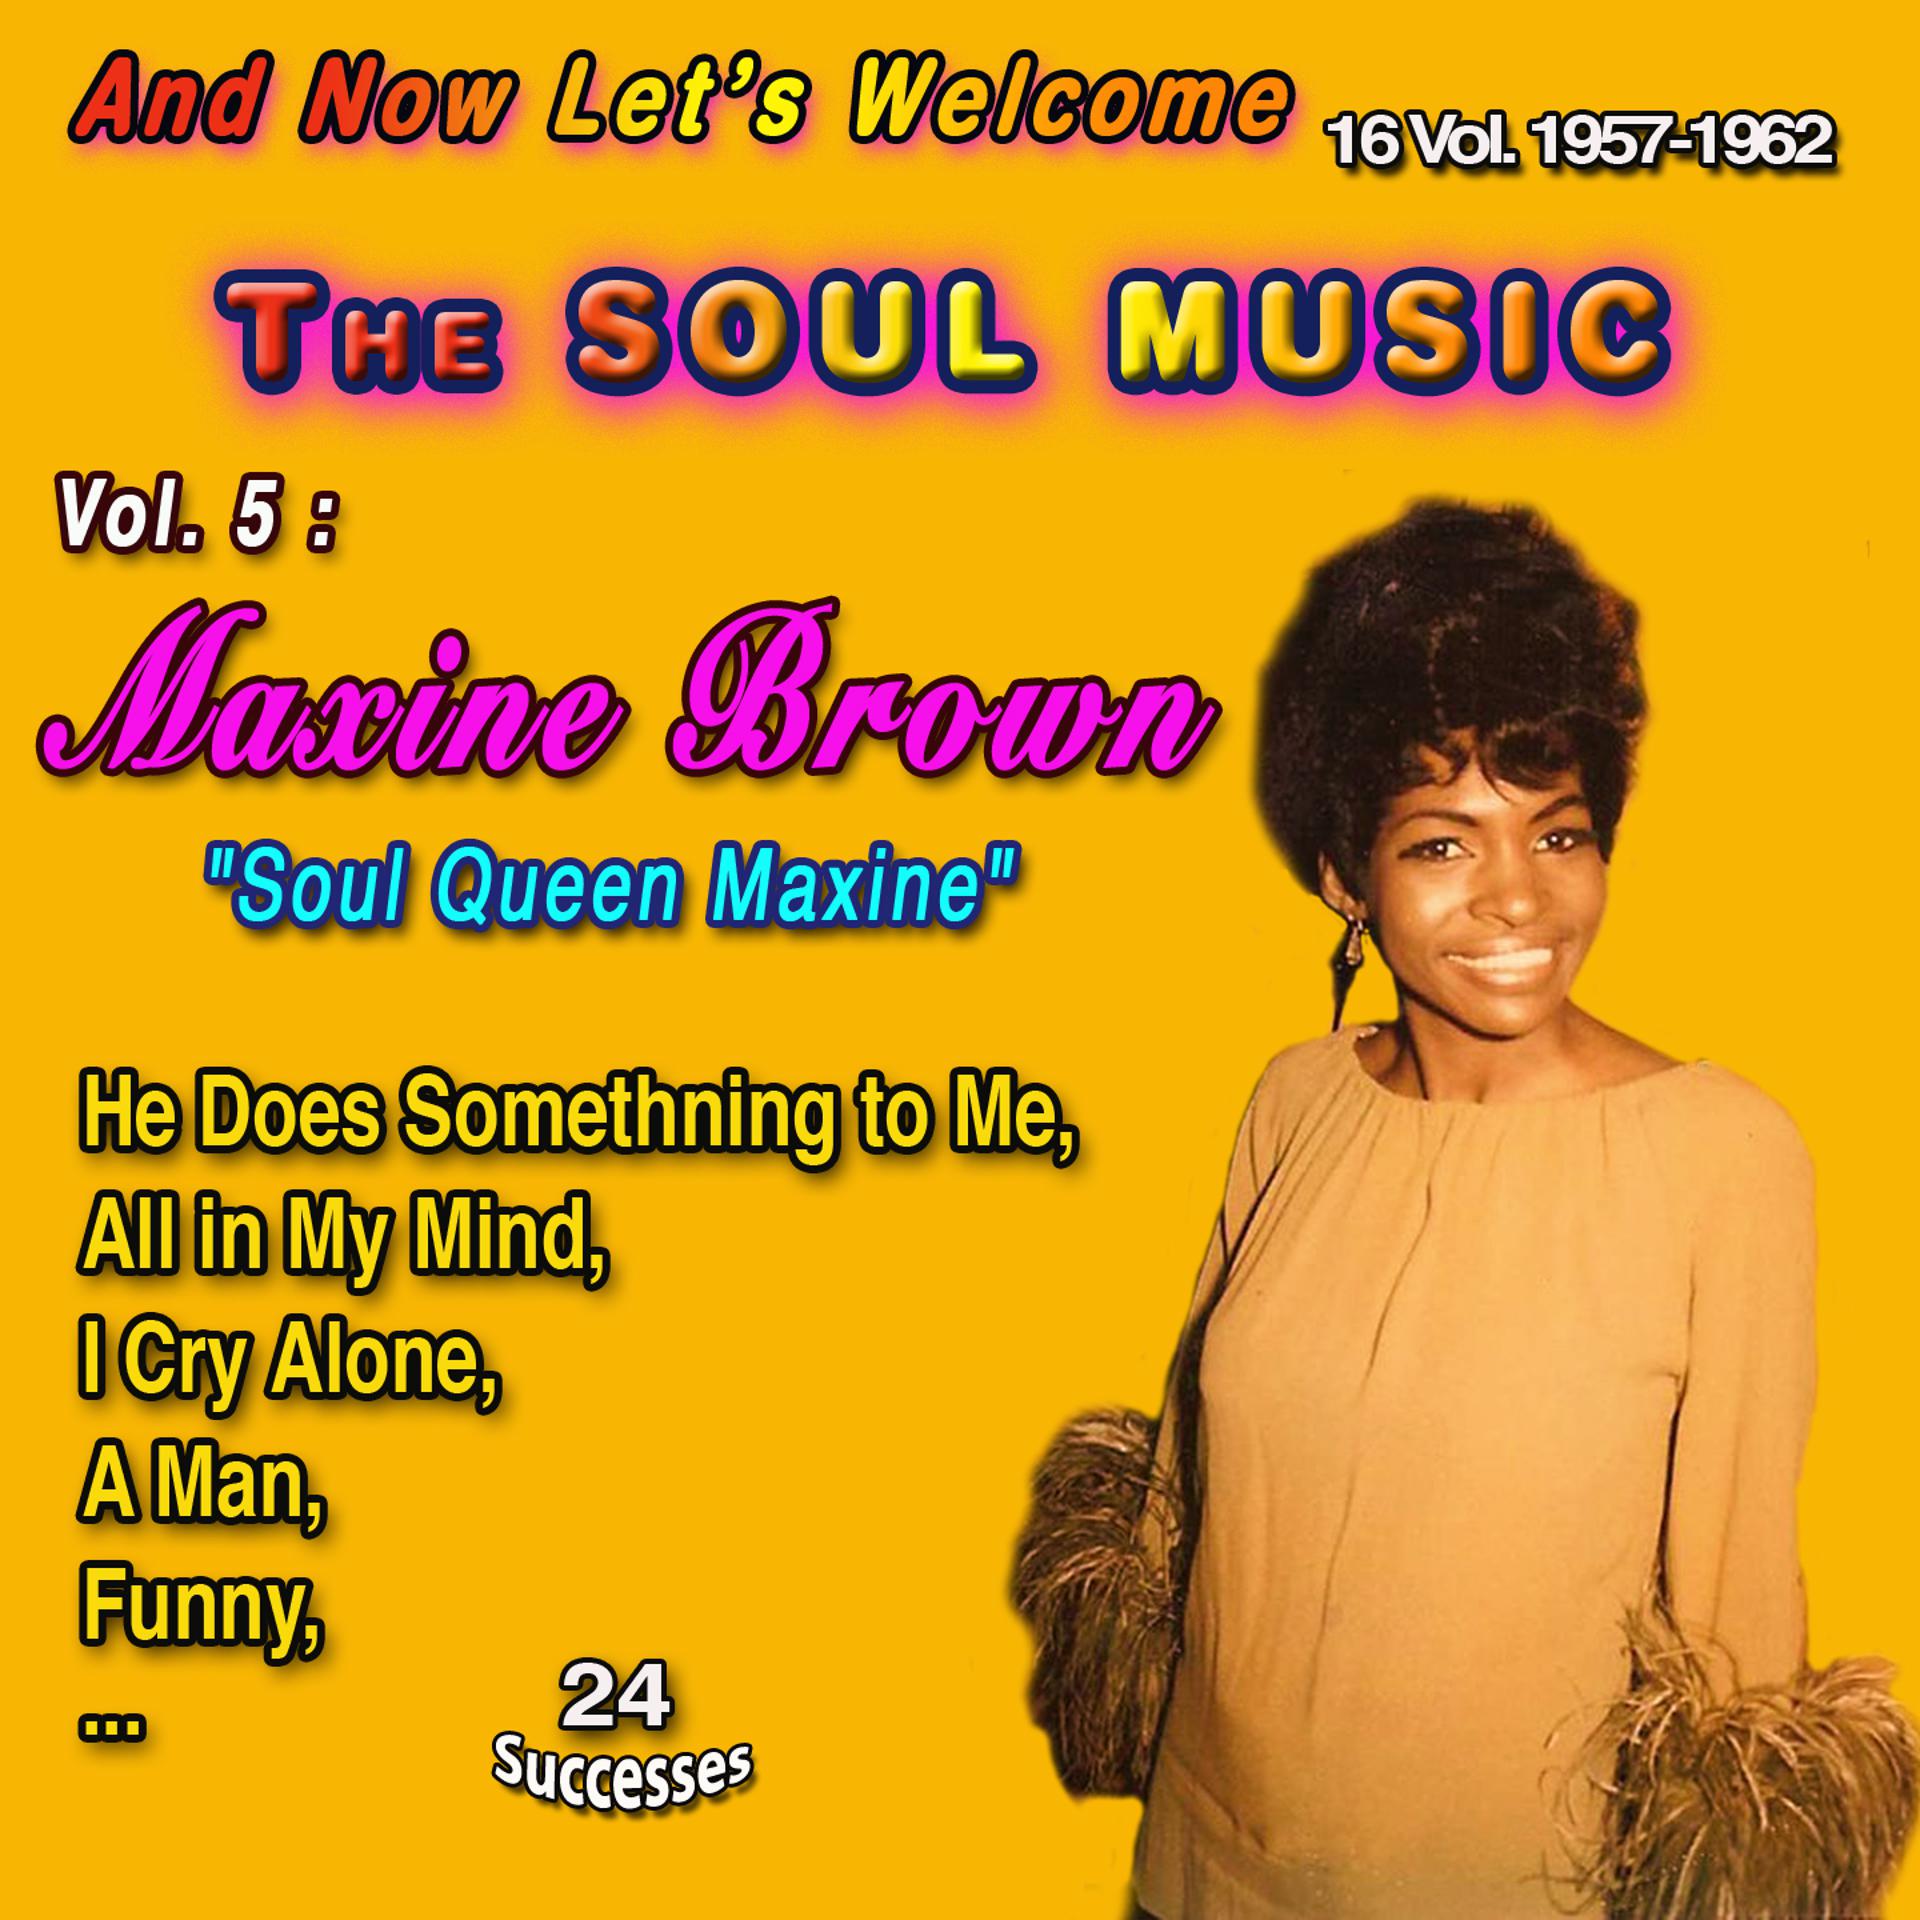 Постер альбома And Now Let's Welcome The Soul Music 16 Vol. 1957-1962 Vol. 5 : Maxine Brown "Soulful Queen Maxine"